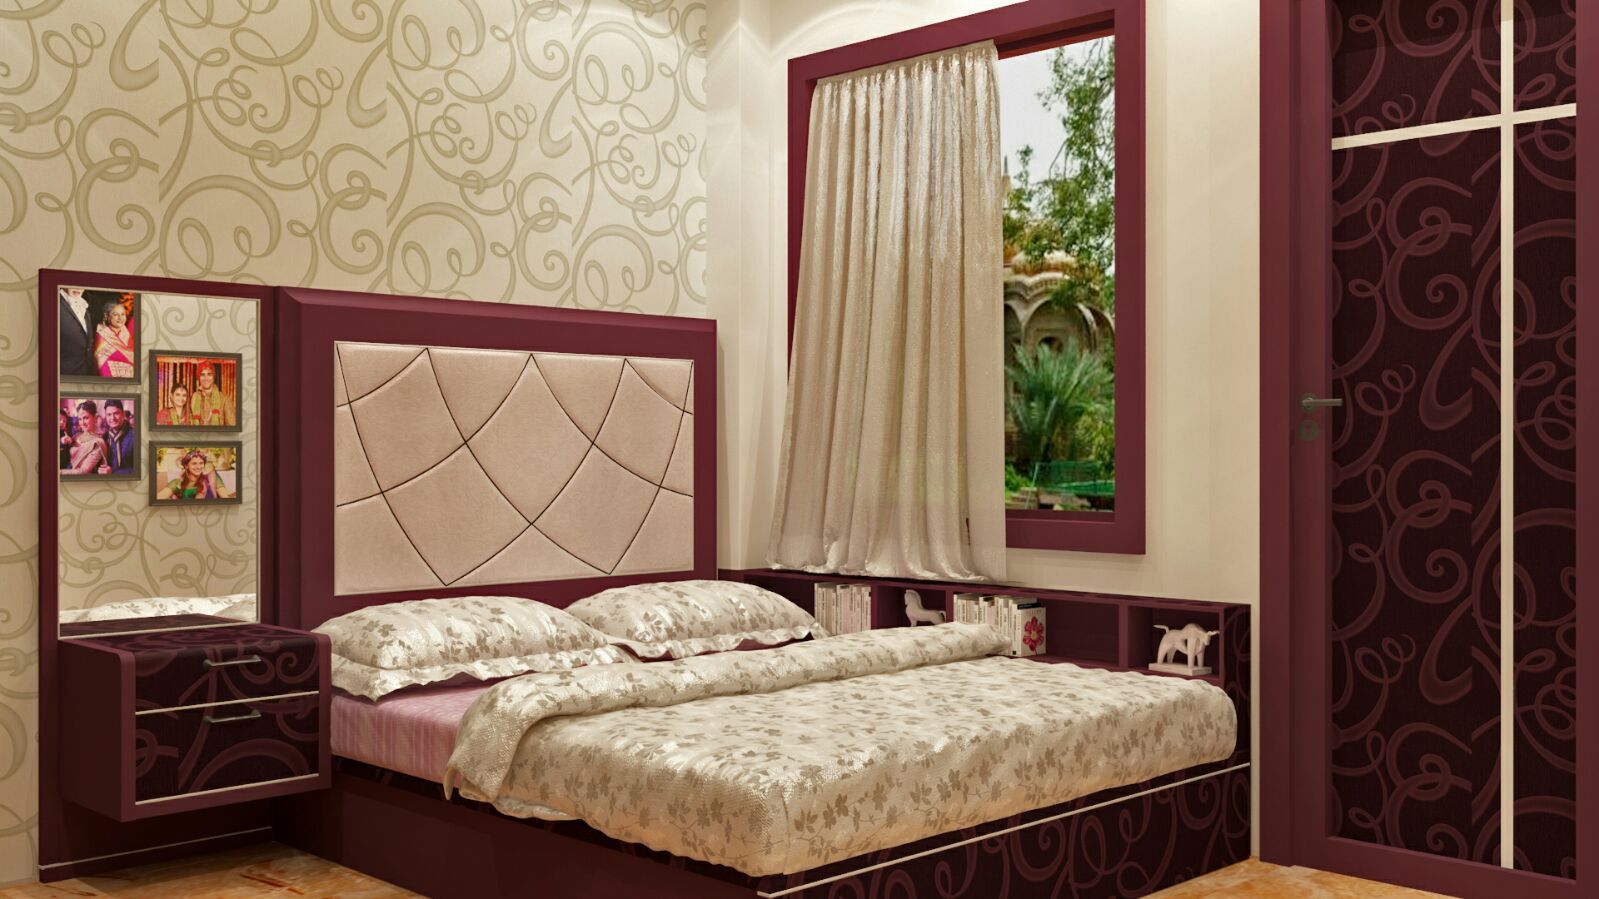 Room 3 bed view Creazione Interiors Modern style bedroom